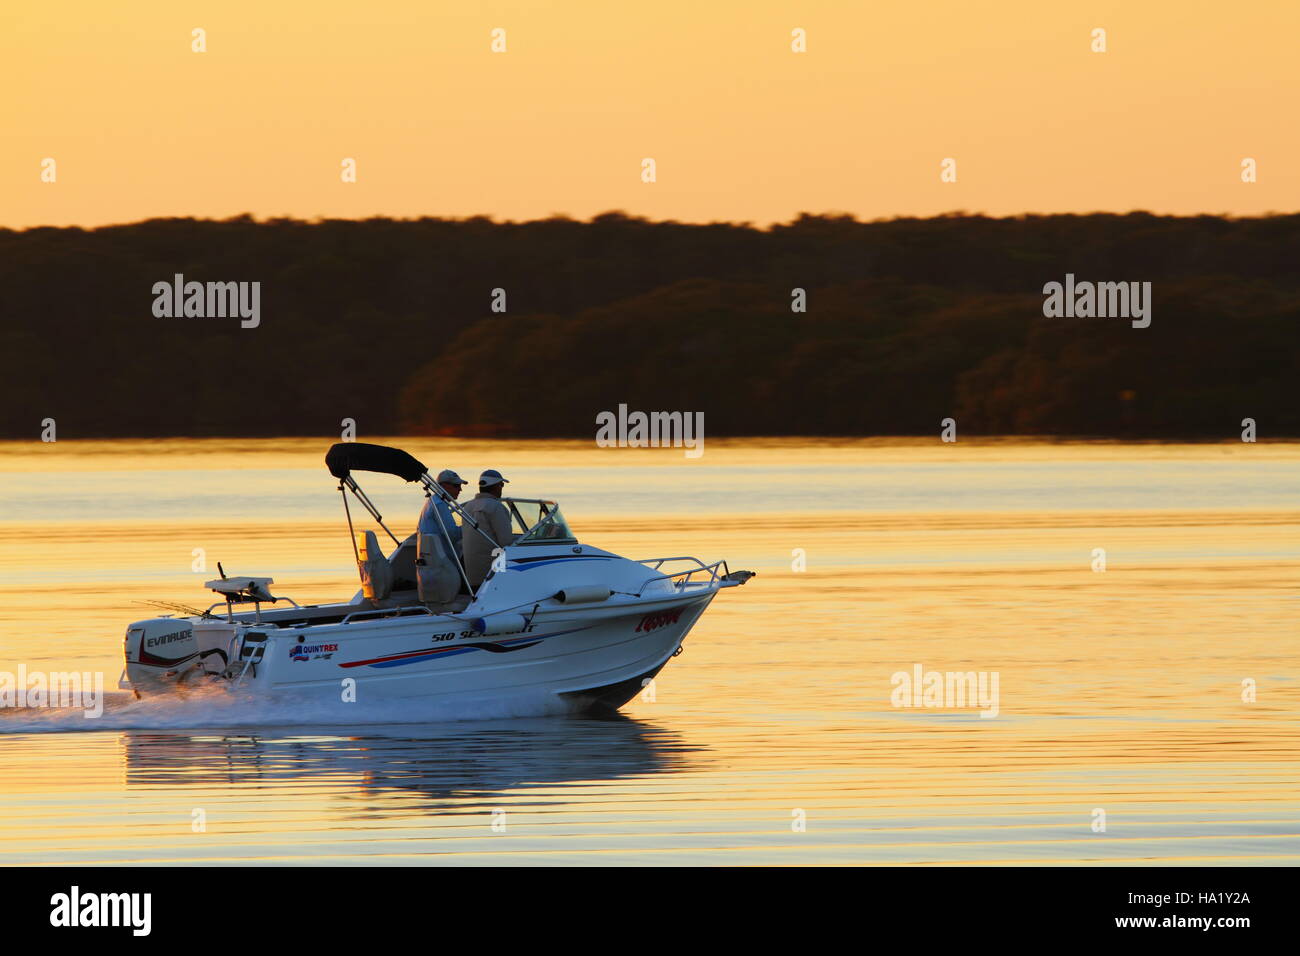 Dawn greets two men on a boat on Pumicestone Passage off Golden Beach, Caloundra on the Sunshine Coast of Queensland, Australia. Stock Photo